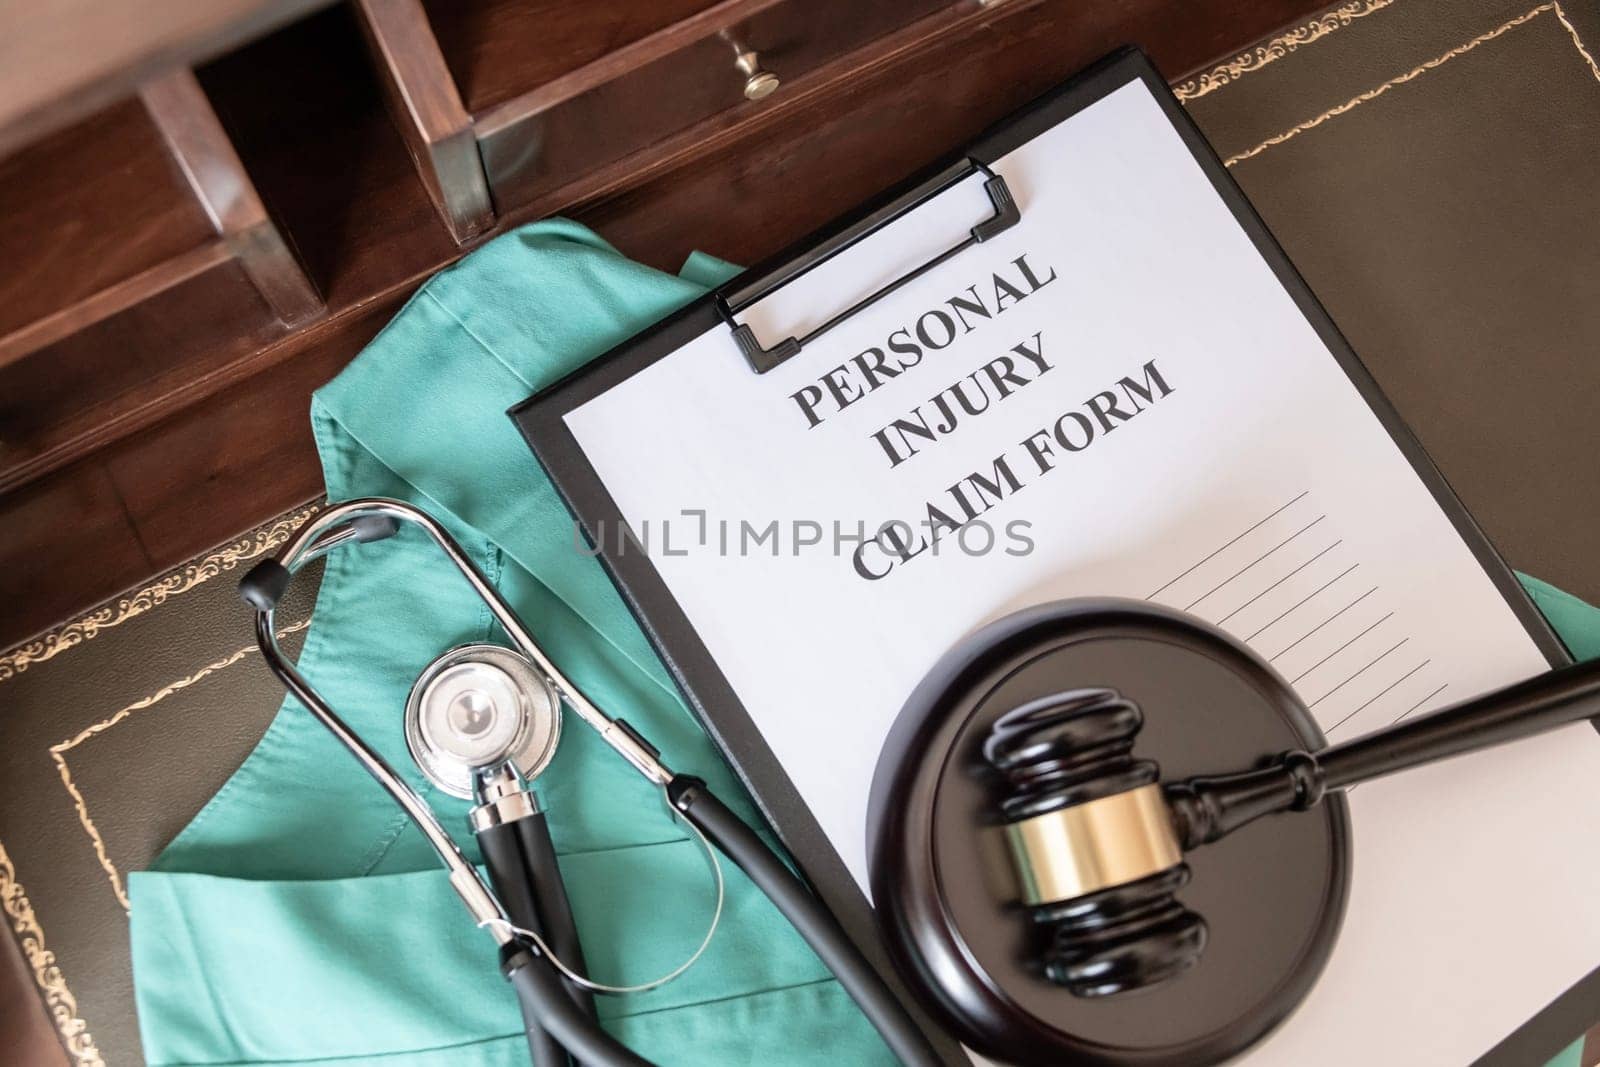 Medical Claim Form with Stethoscope on Doctor's Desk